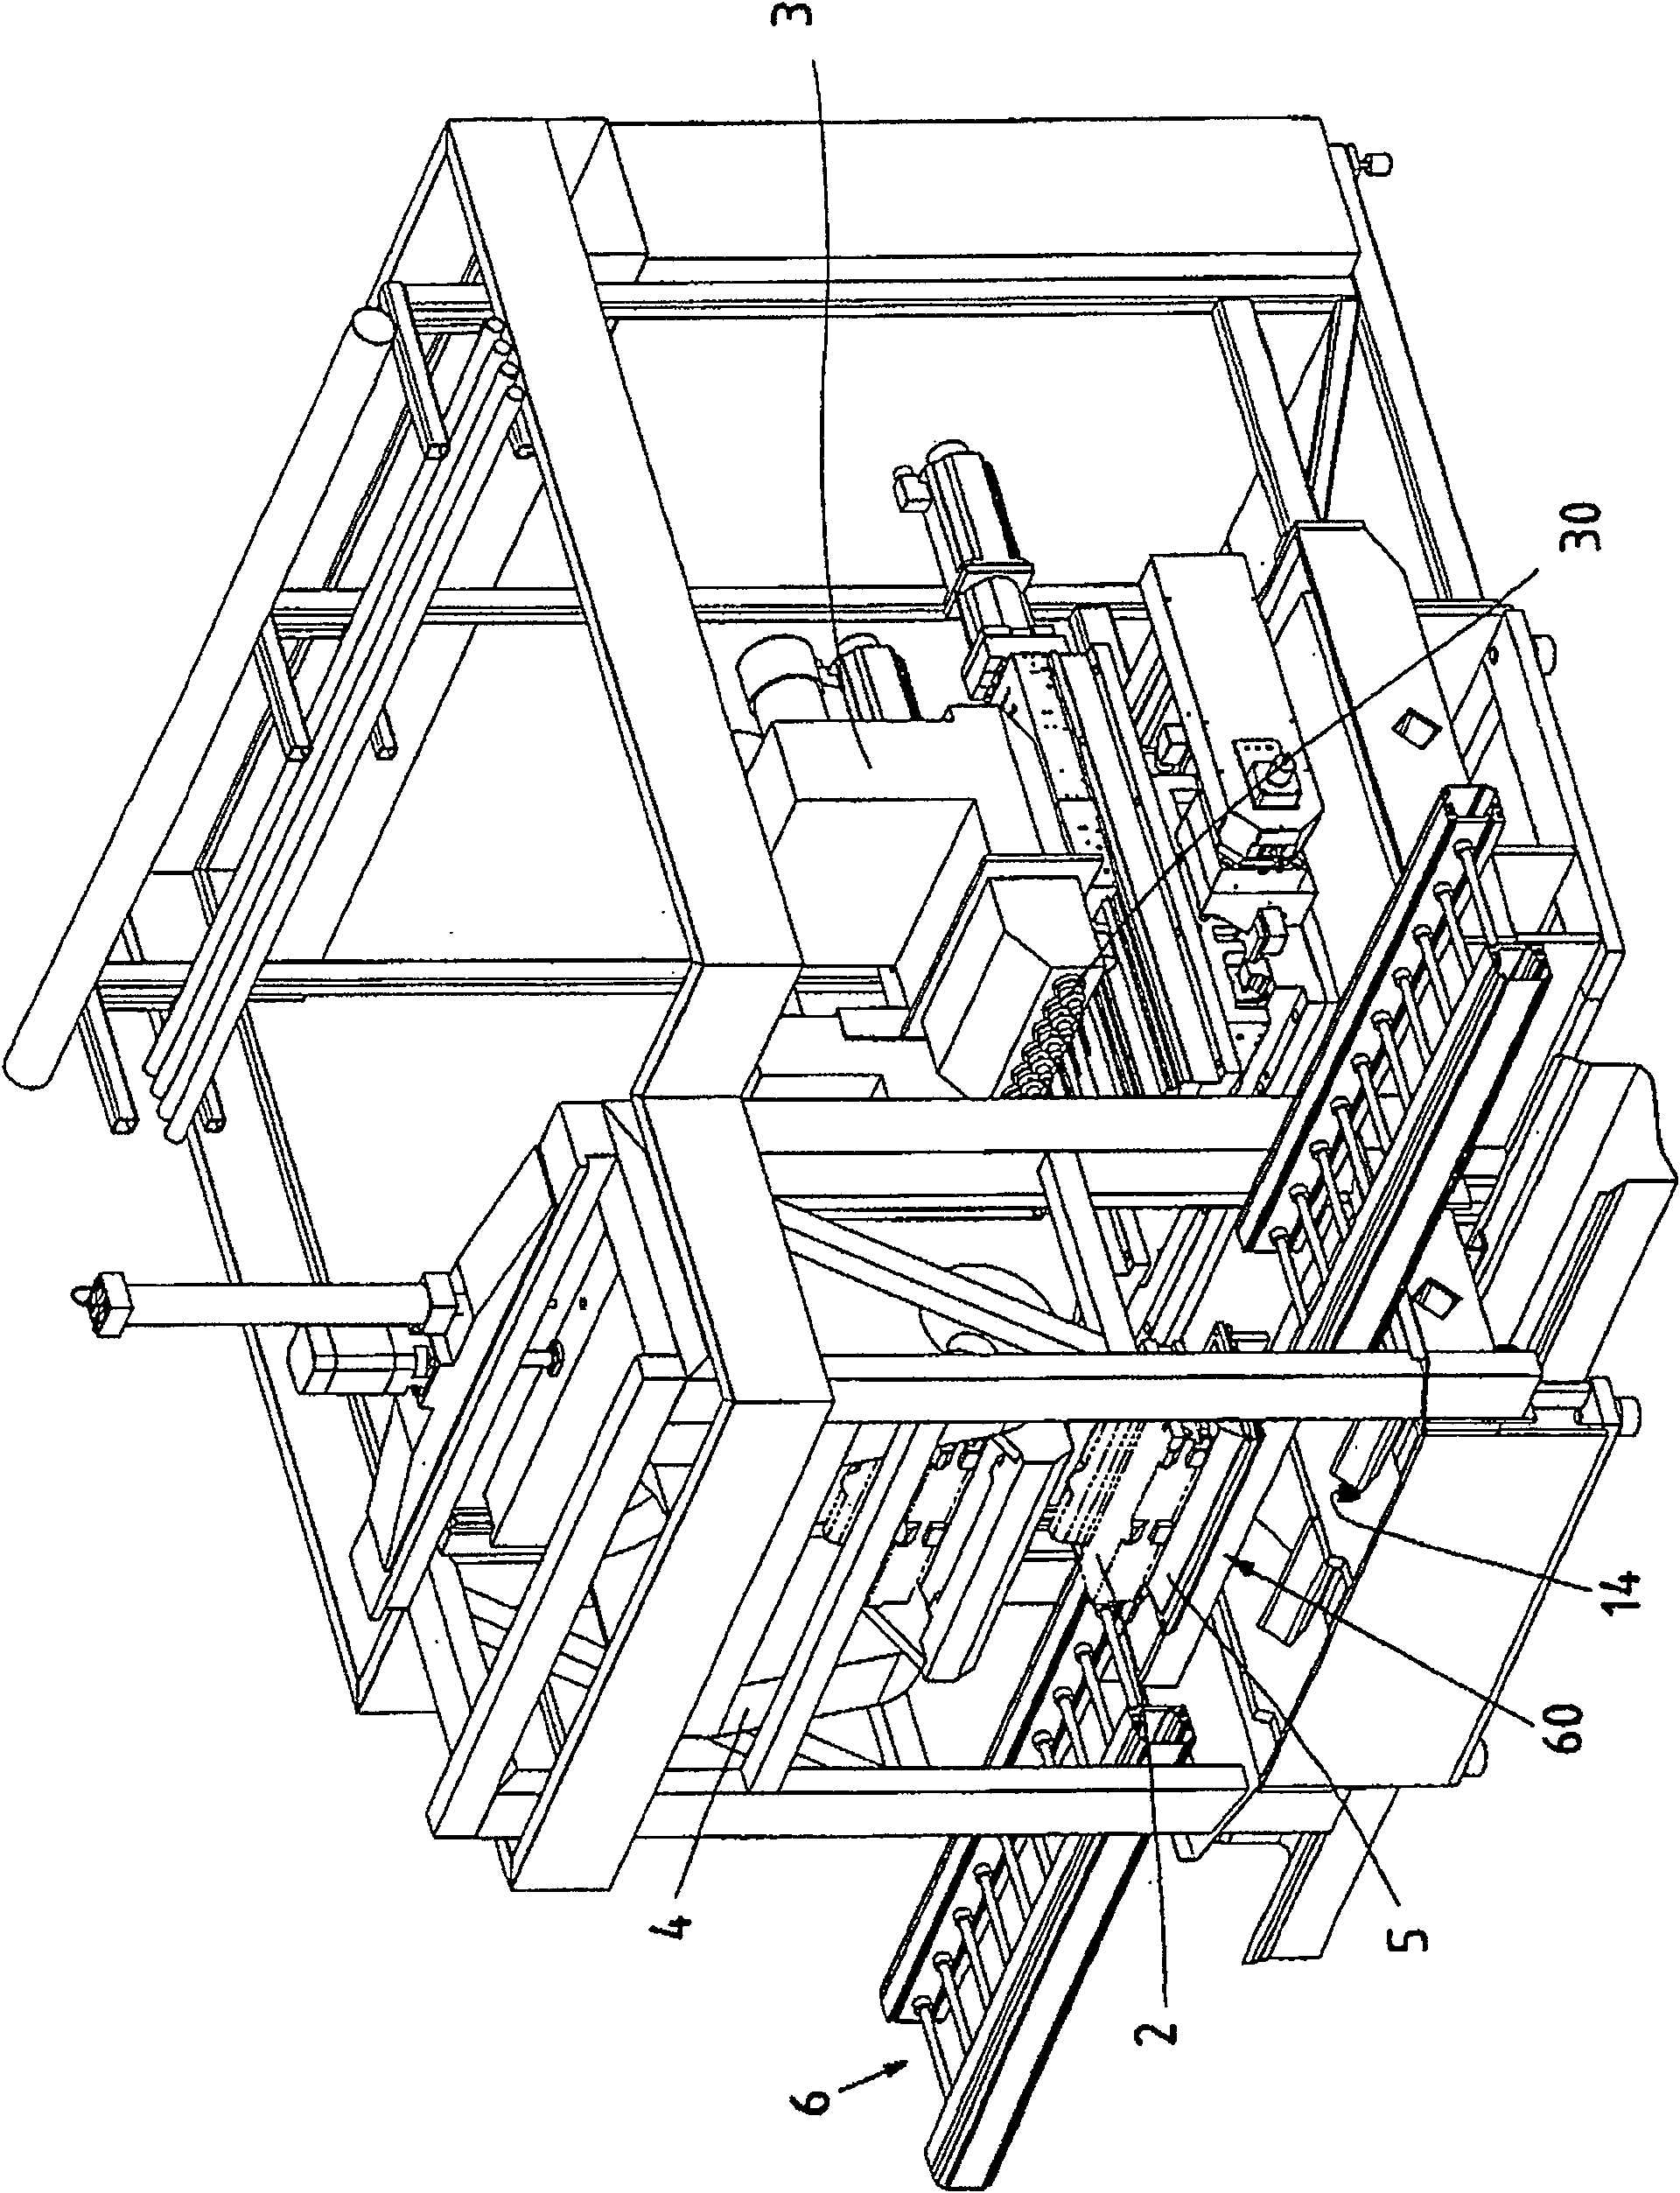 Maching station, maching device and method of positioning workpiece on the maching unit